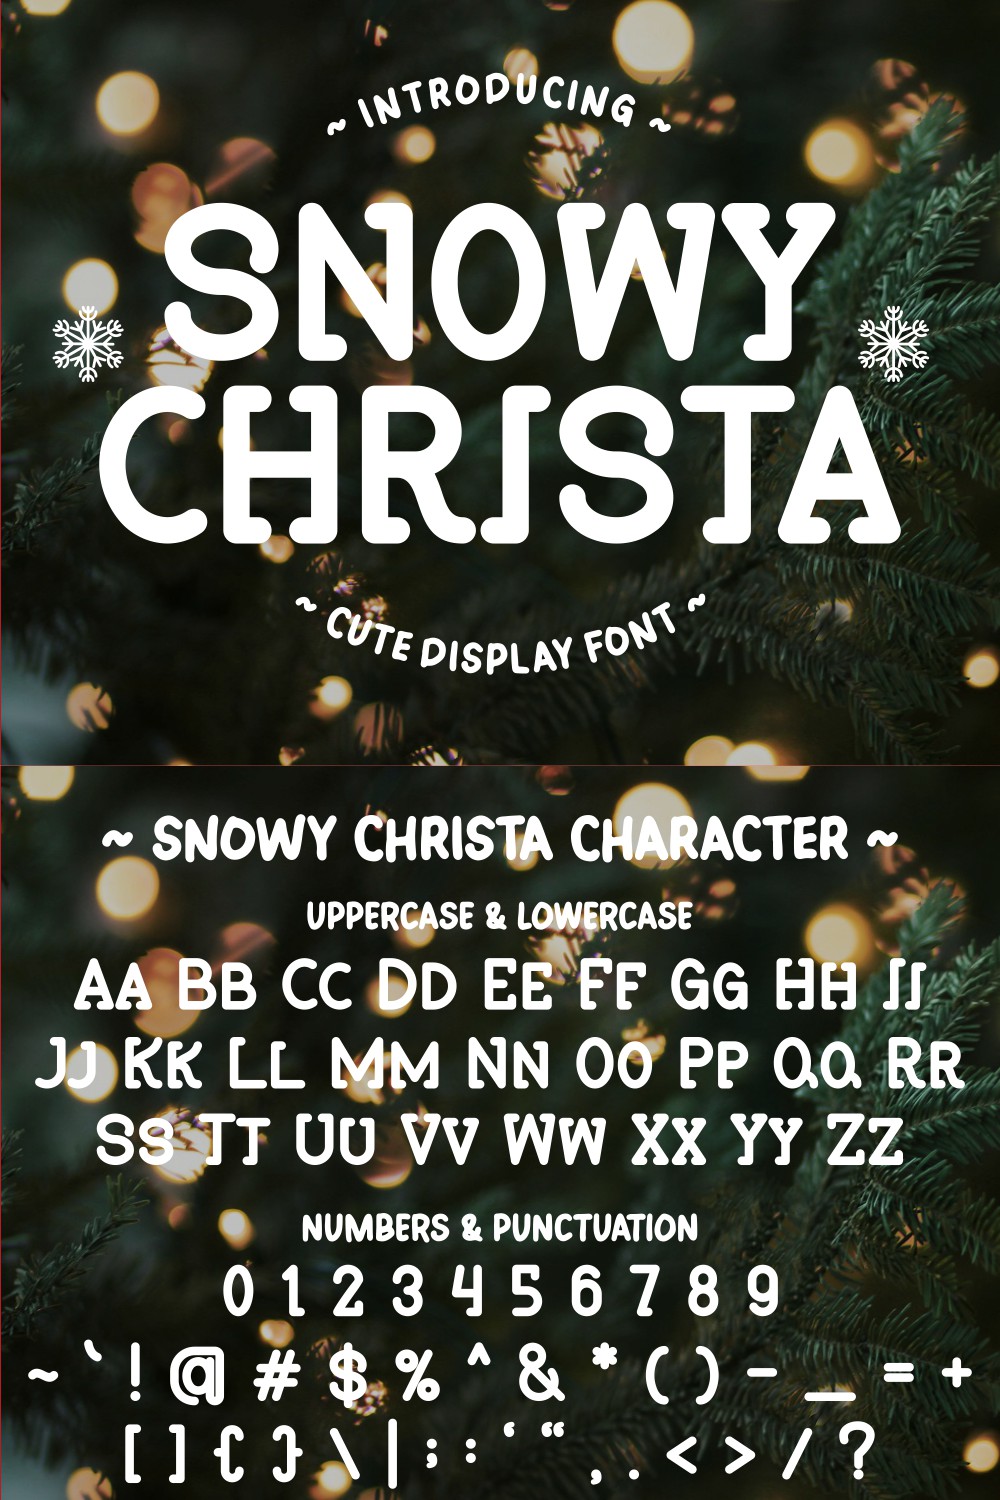 Snowy Christa - Cute Display Font pinterest preview image.